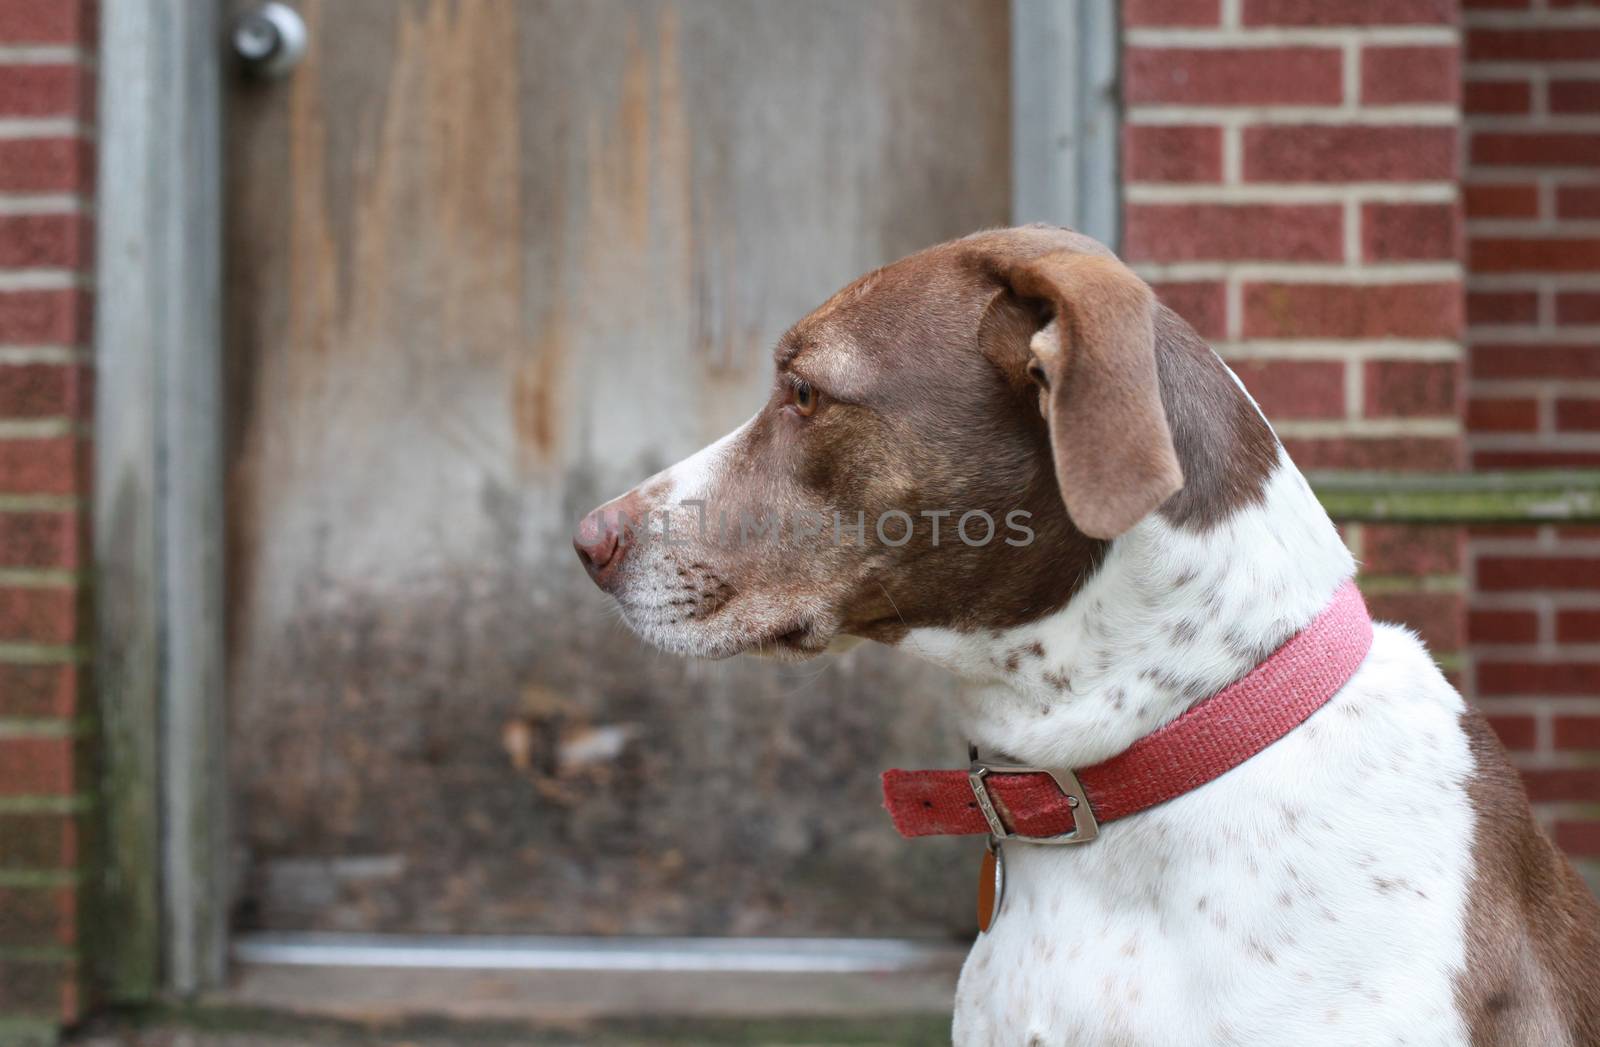 Bird Dog Waiting by the Backdoor by tornado98